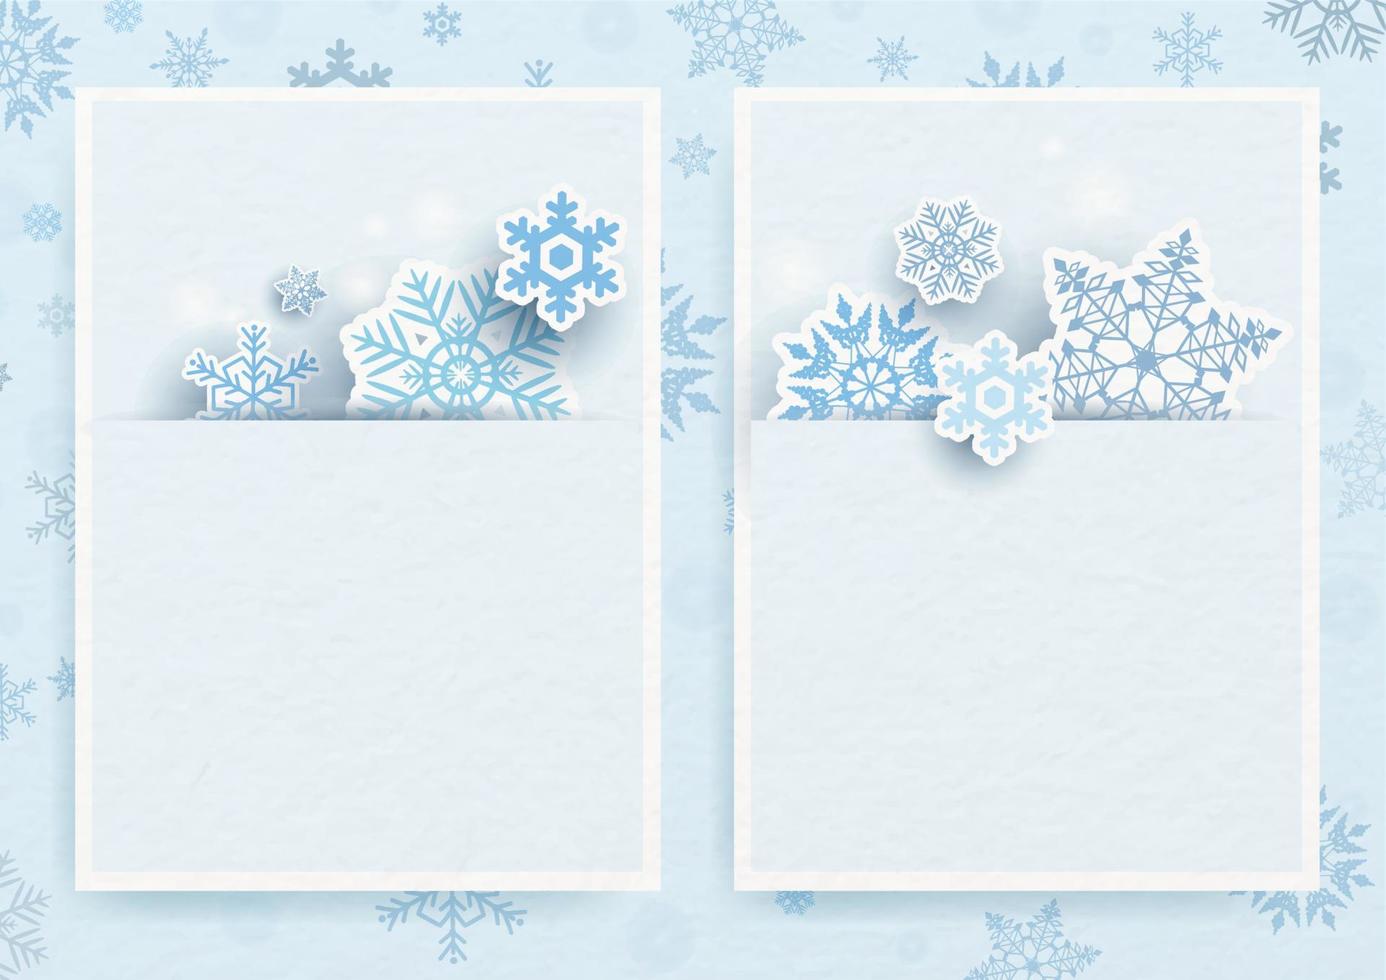 Blue snow flake in paper cut style put in postcards with space for texts on silhouette snow flakes pattern and white paper pattern background. Christmas greeting card and poster in vector design.